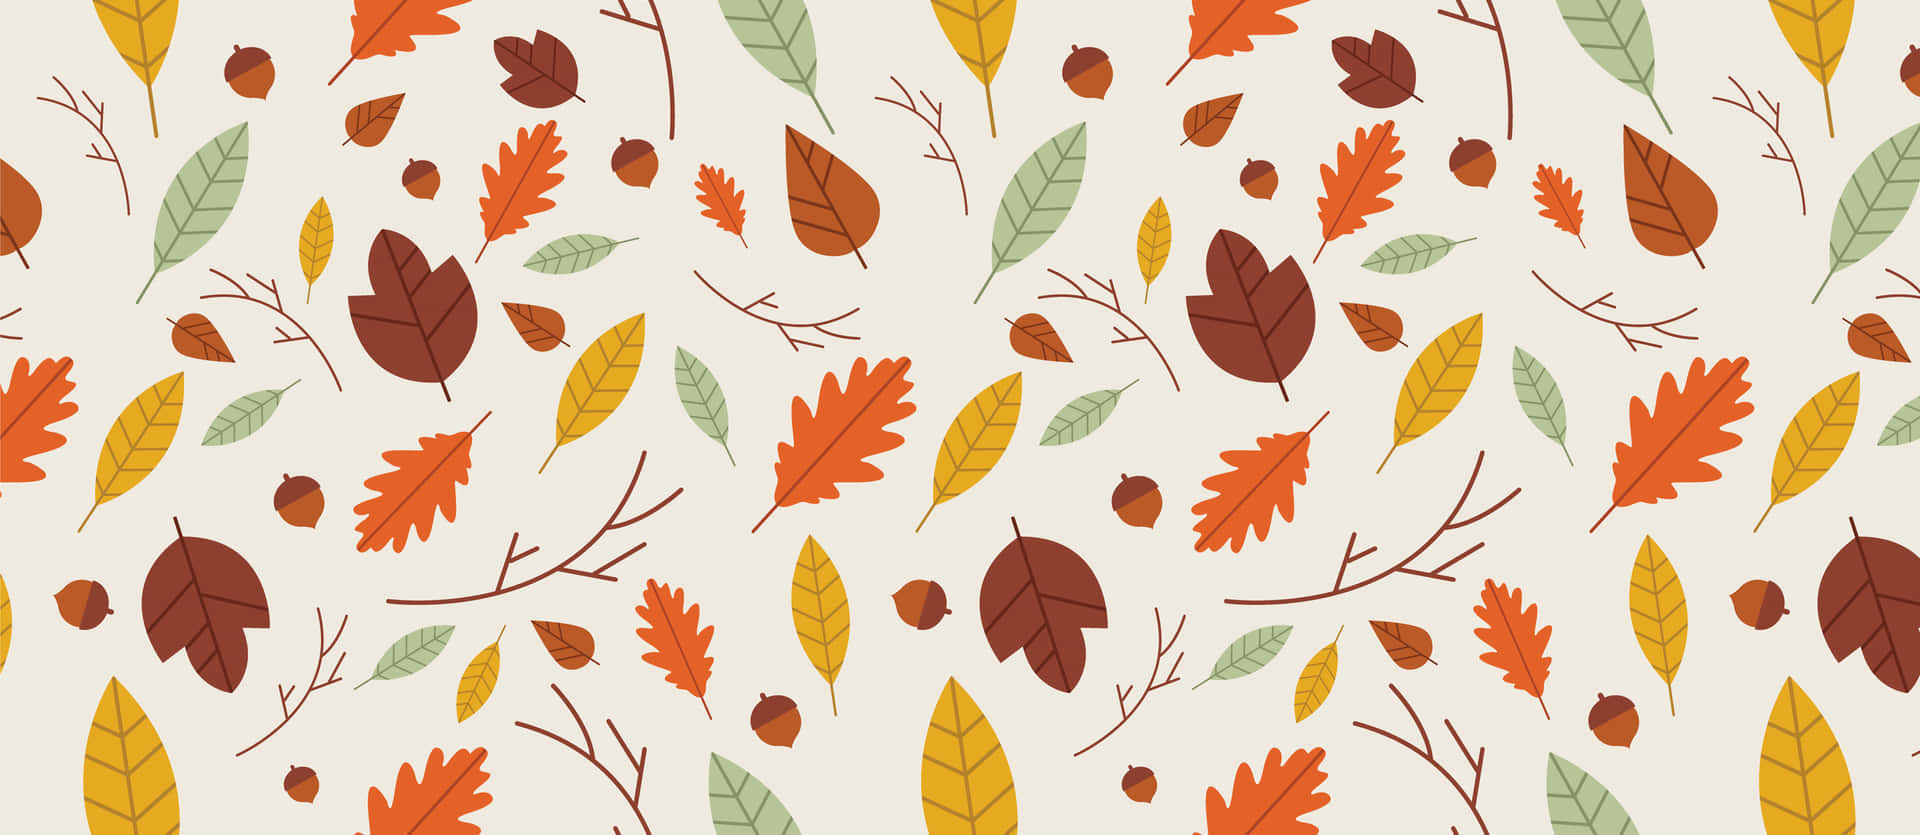 Autumn Leaves Pattern On A White Background